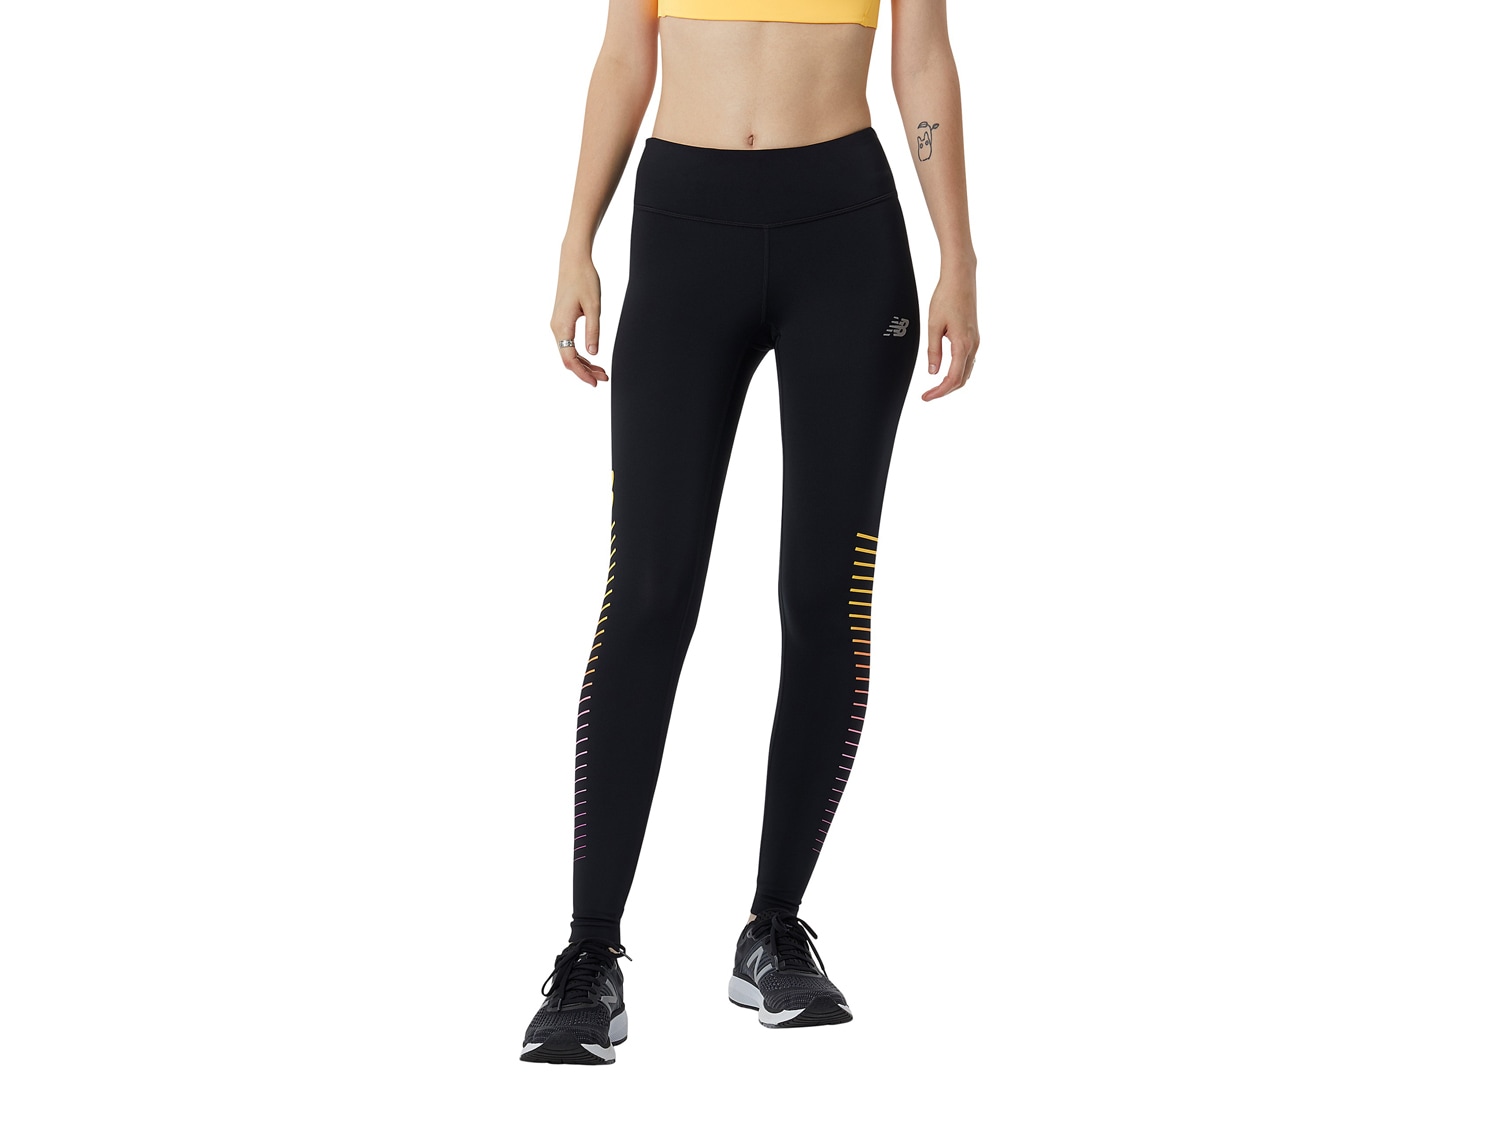 New Balance Printed Accelerate Women's Tights - Free Shipping